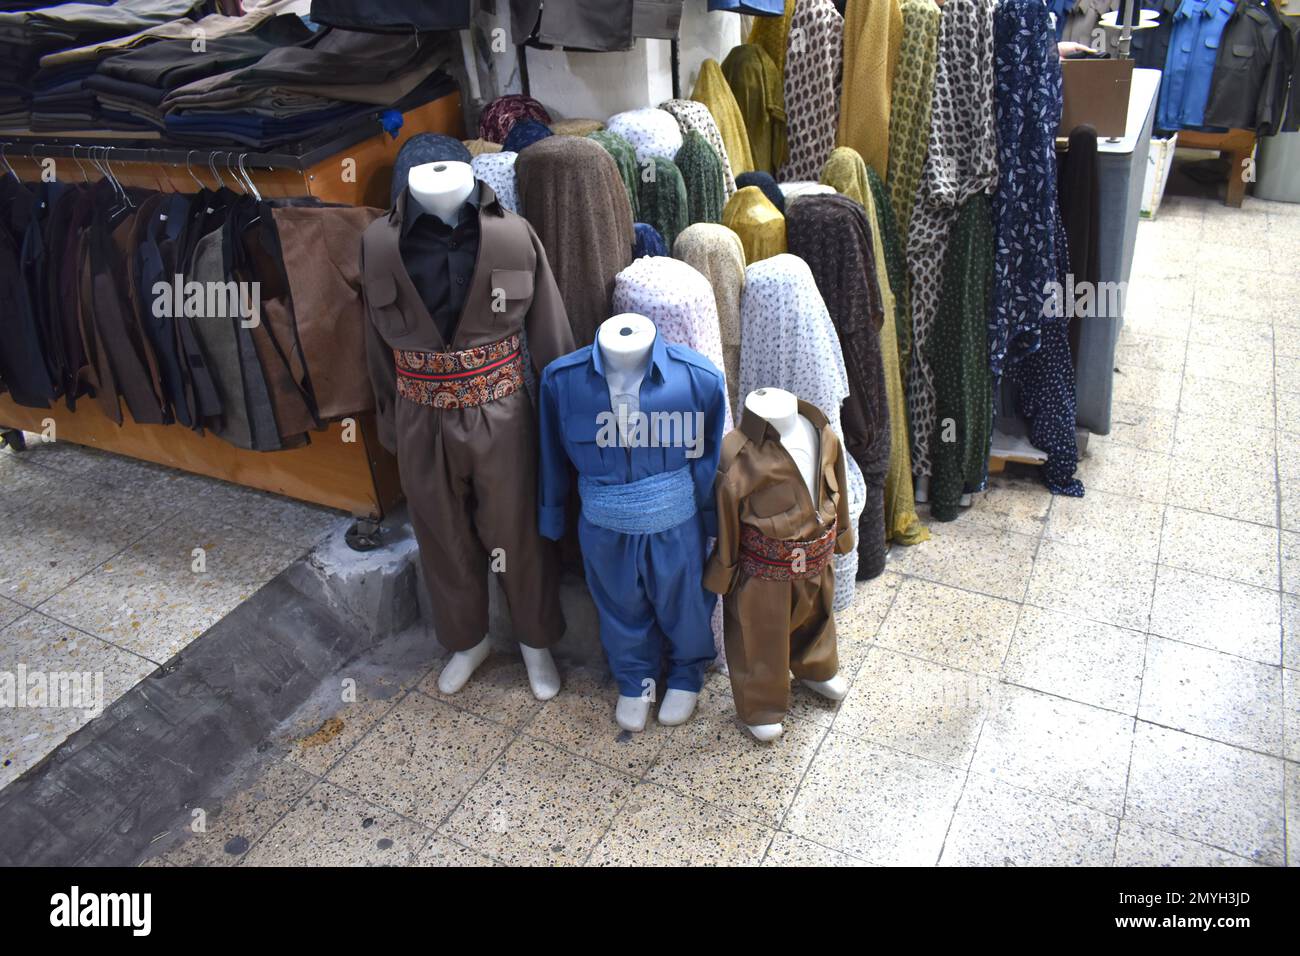 Traditional Kurdish outfits for sale in the souq (market), Duhok, Northern Iraq Stock Photo